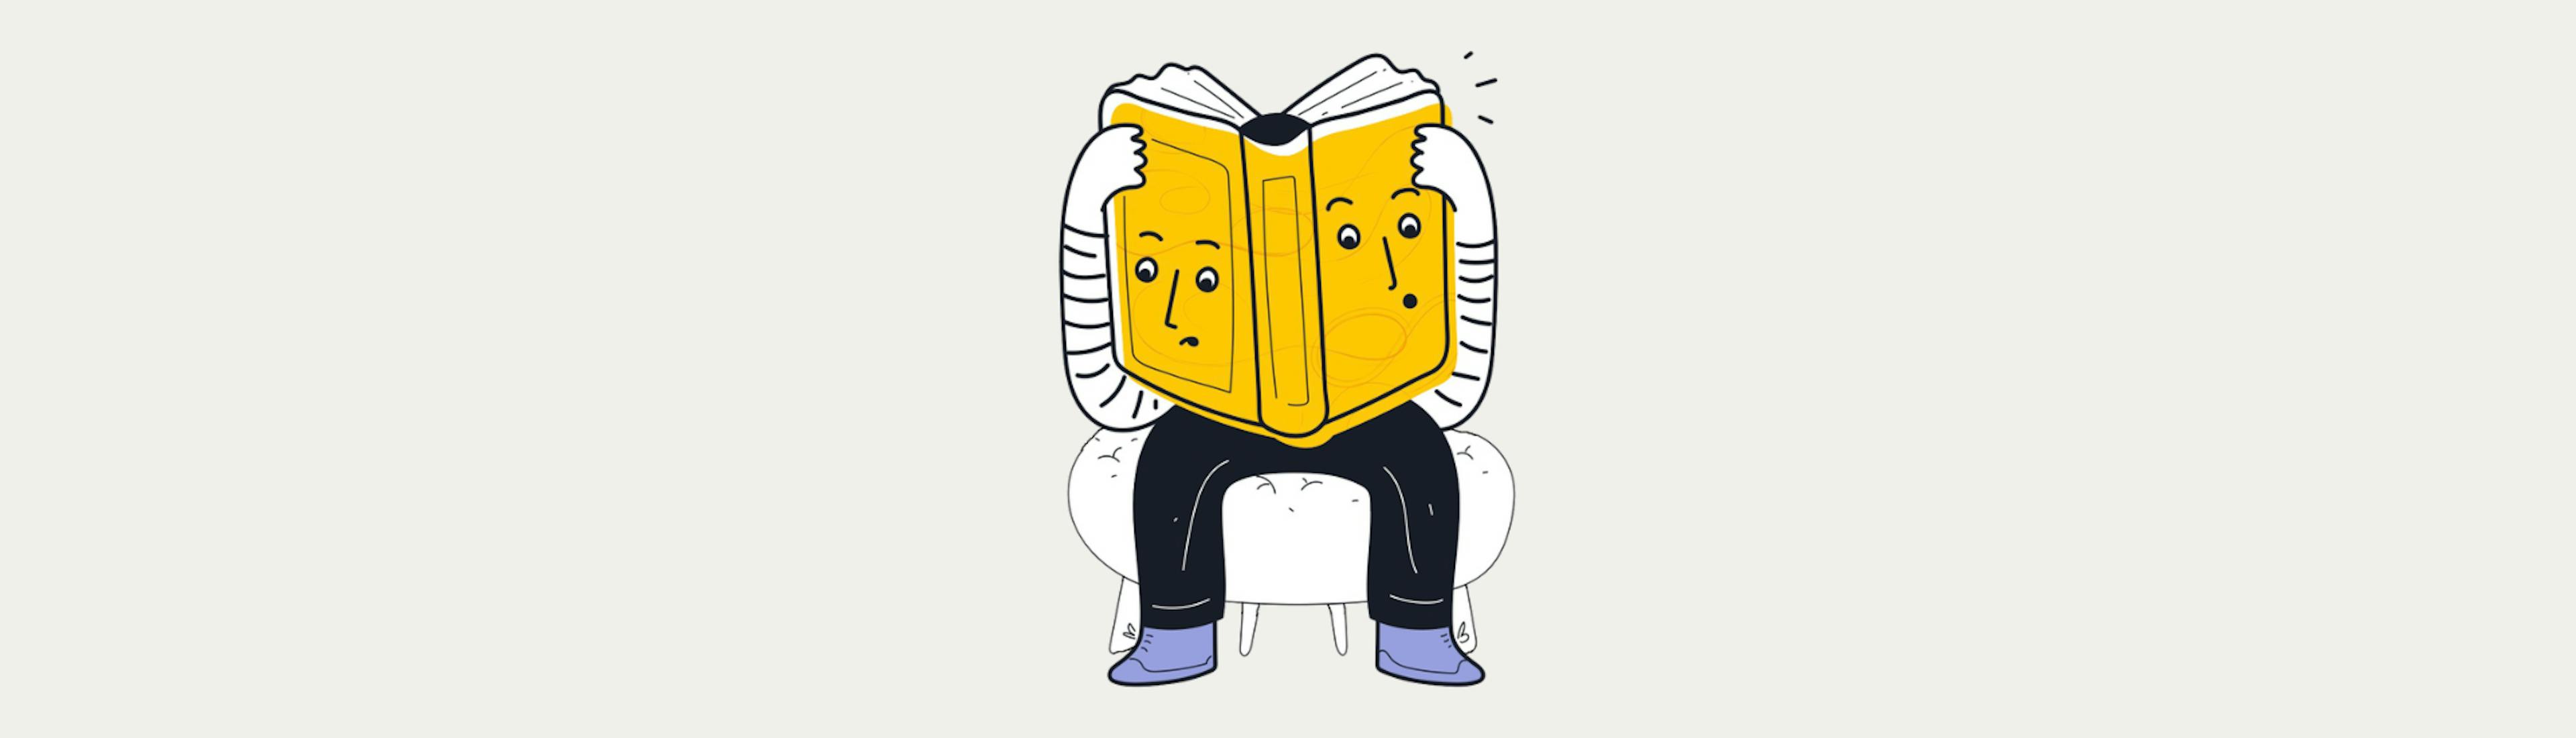 Illustration. Book the size of the upper body with faces on it. From behind the book come 2 arms that hold the book and 2 legs.